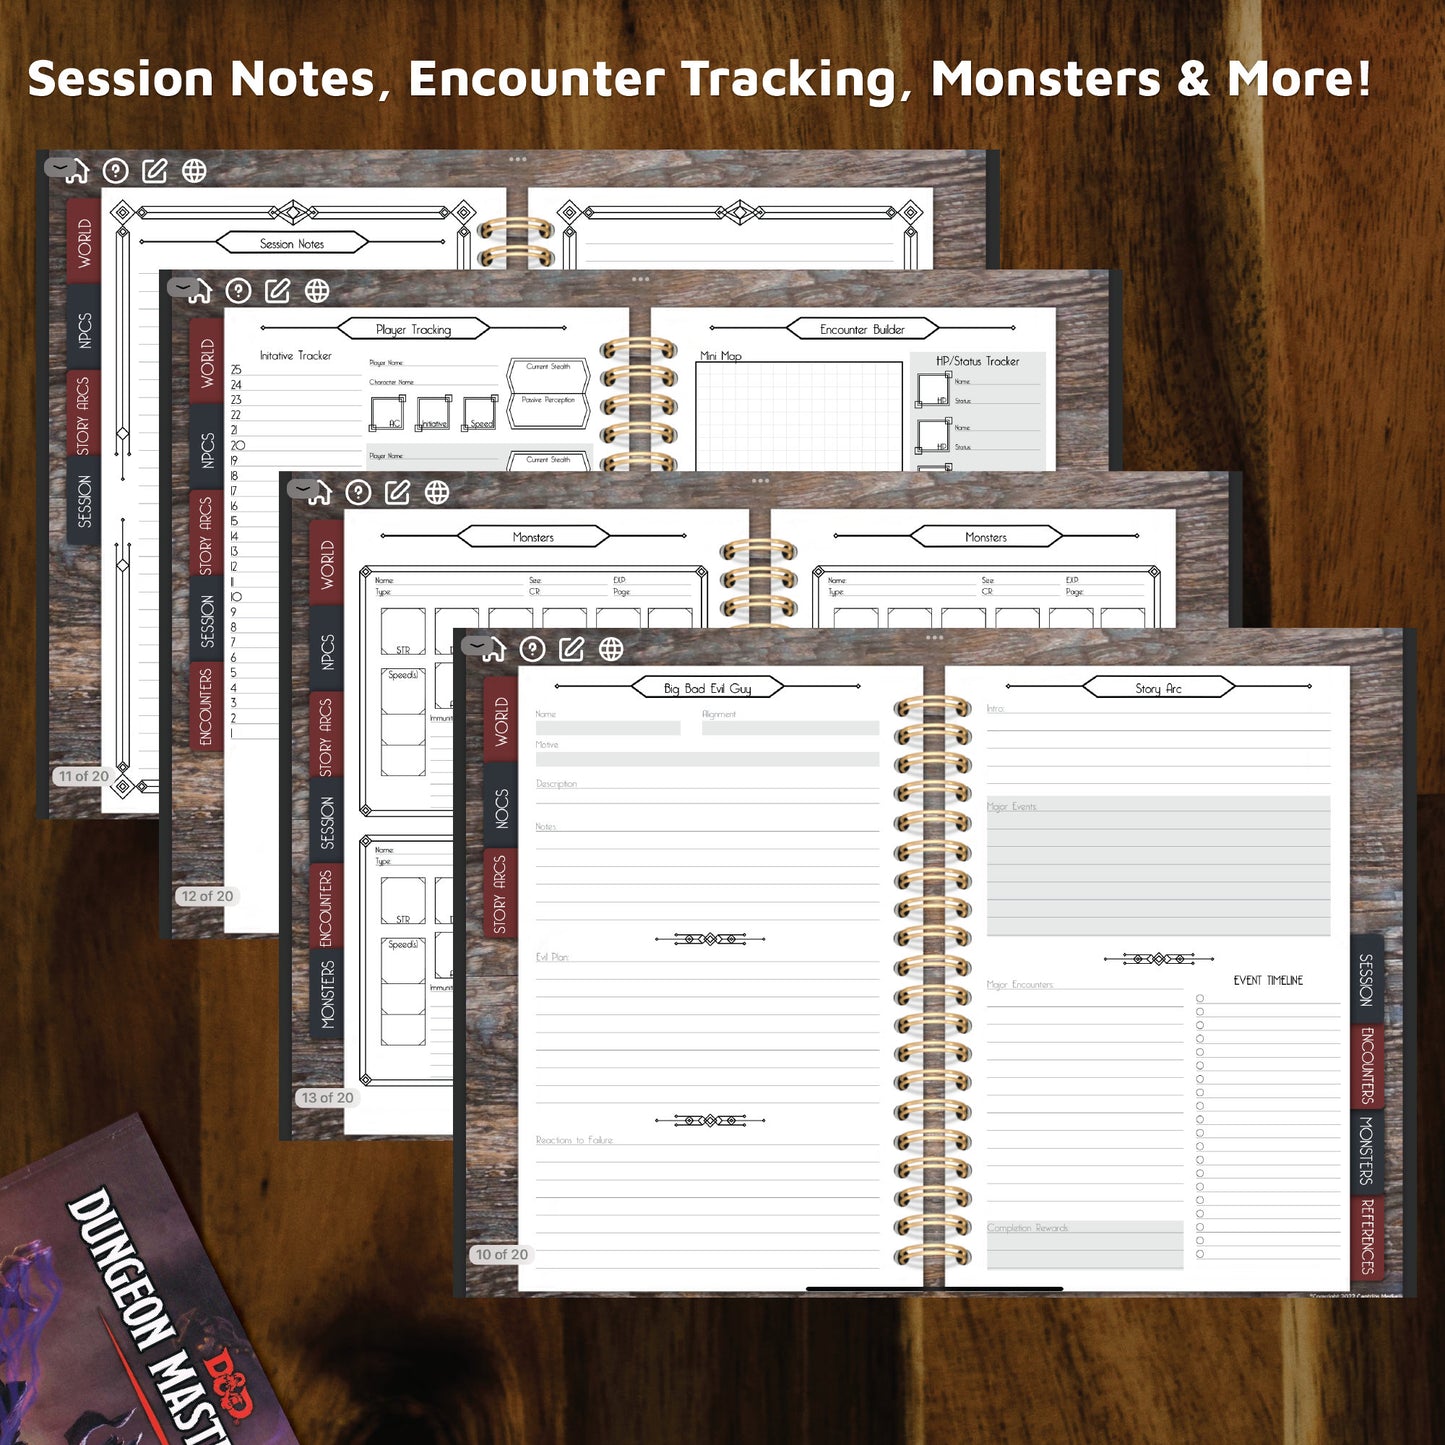 Campaign Assistant - Digital Dungeon Master Notebook